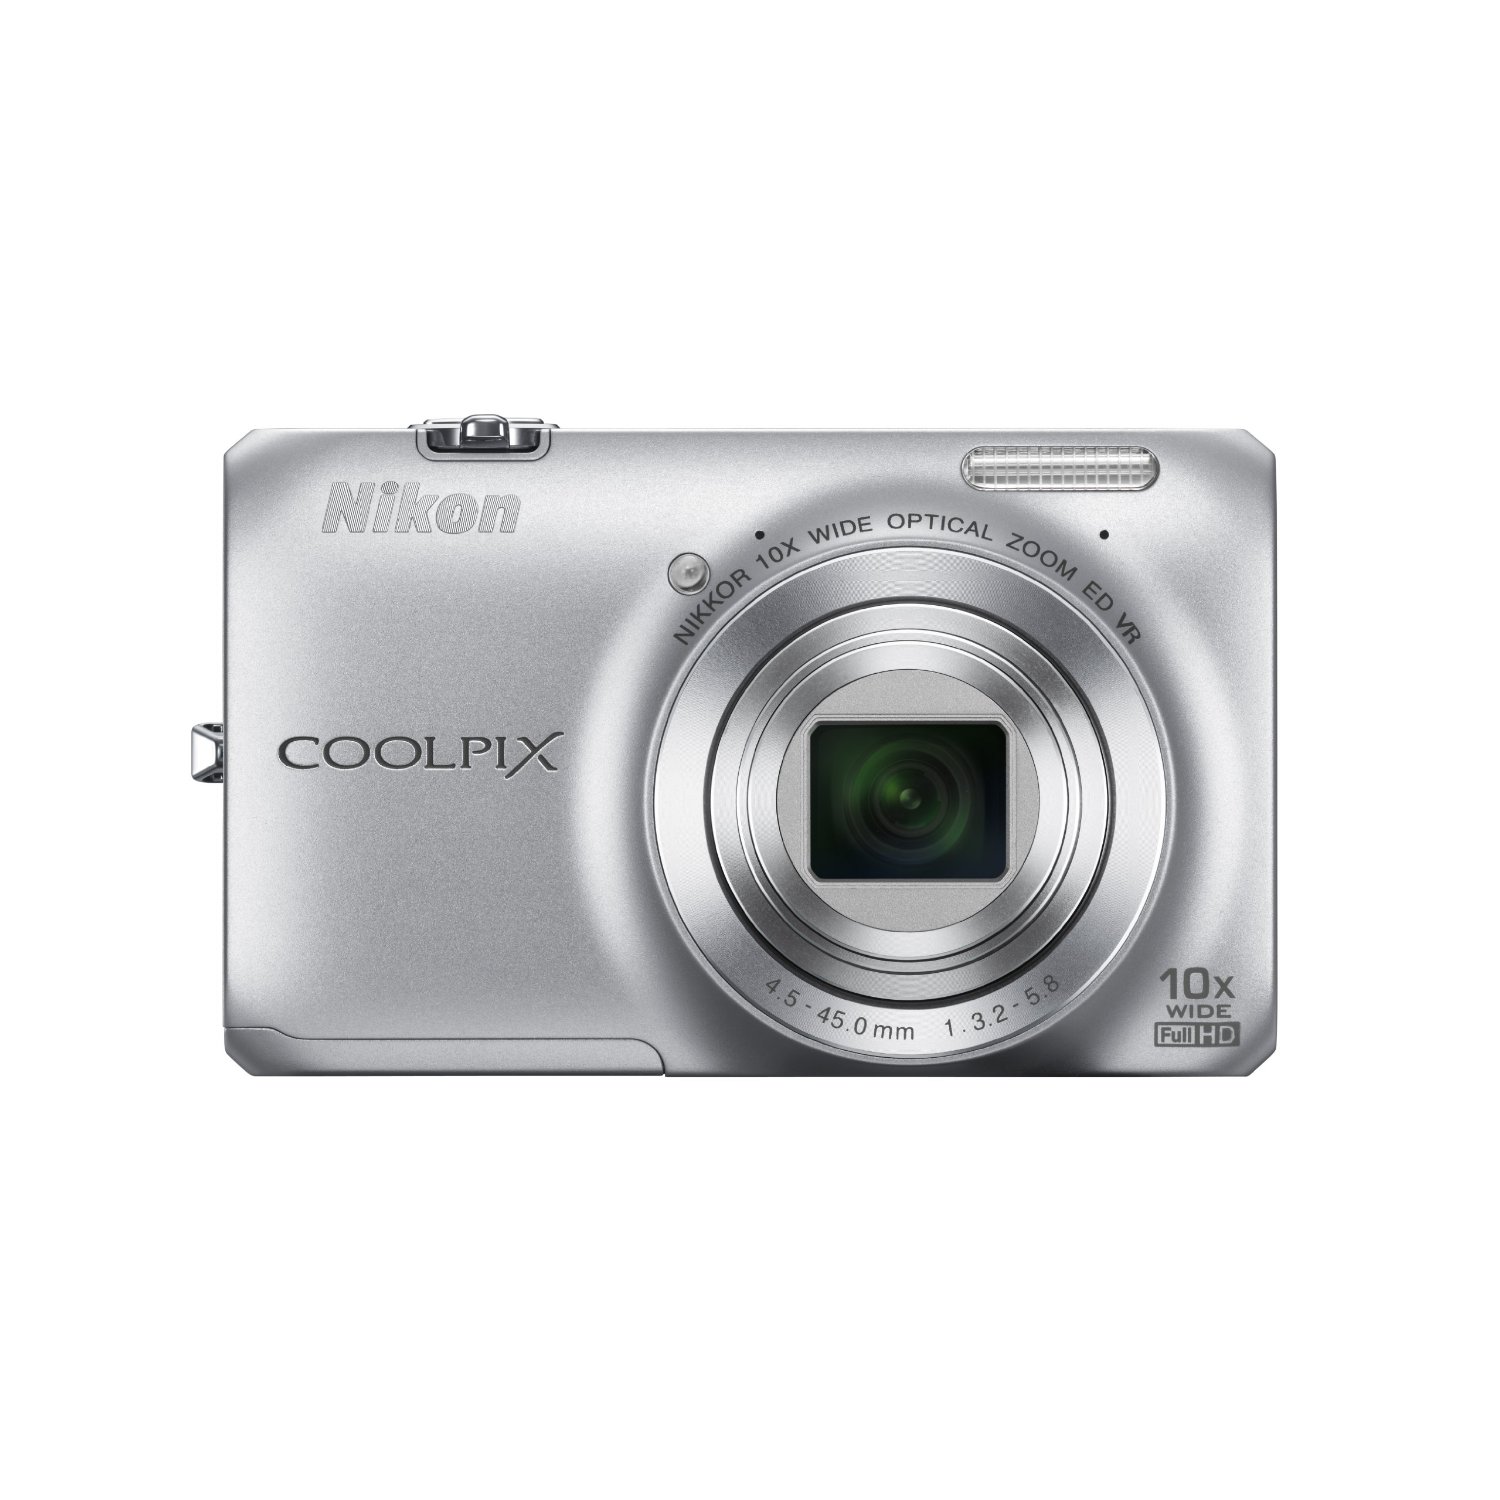 Nikon COOLPIX S6300 16 MP Digital Camera with 10x Optical Zoom NIKKOR Glass Lens and Full HD 1080p Video (Silver) $109.95+free shipping